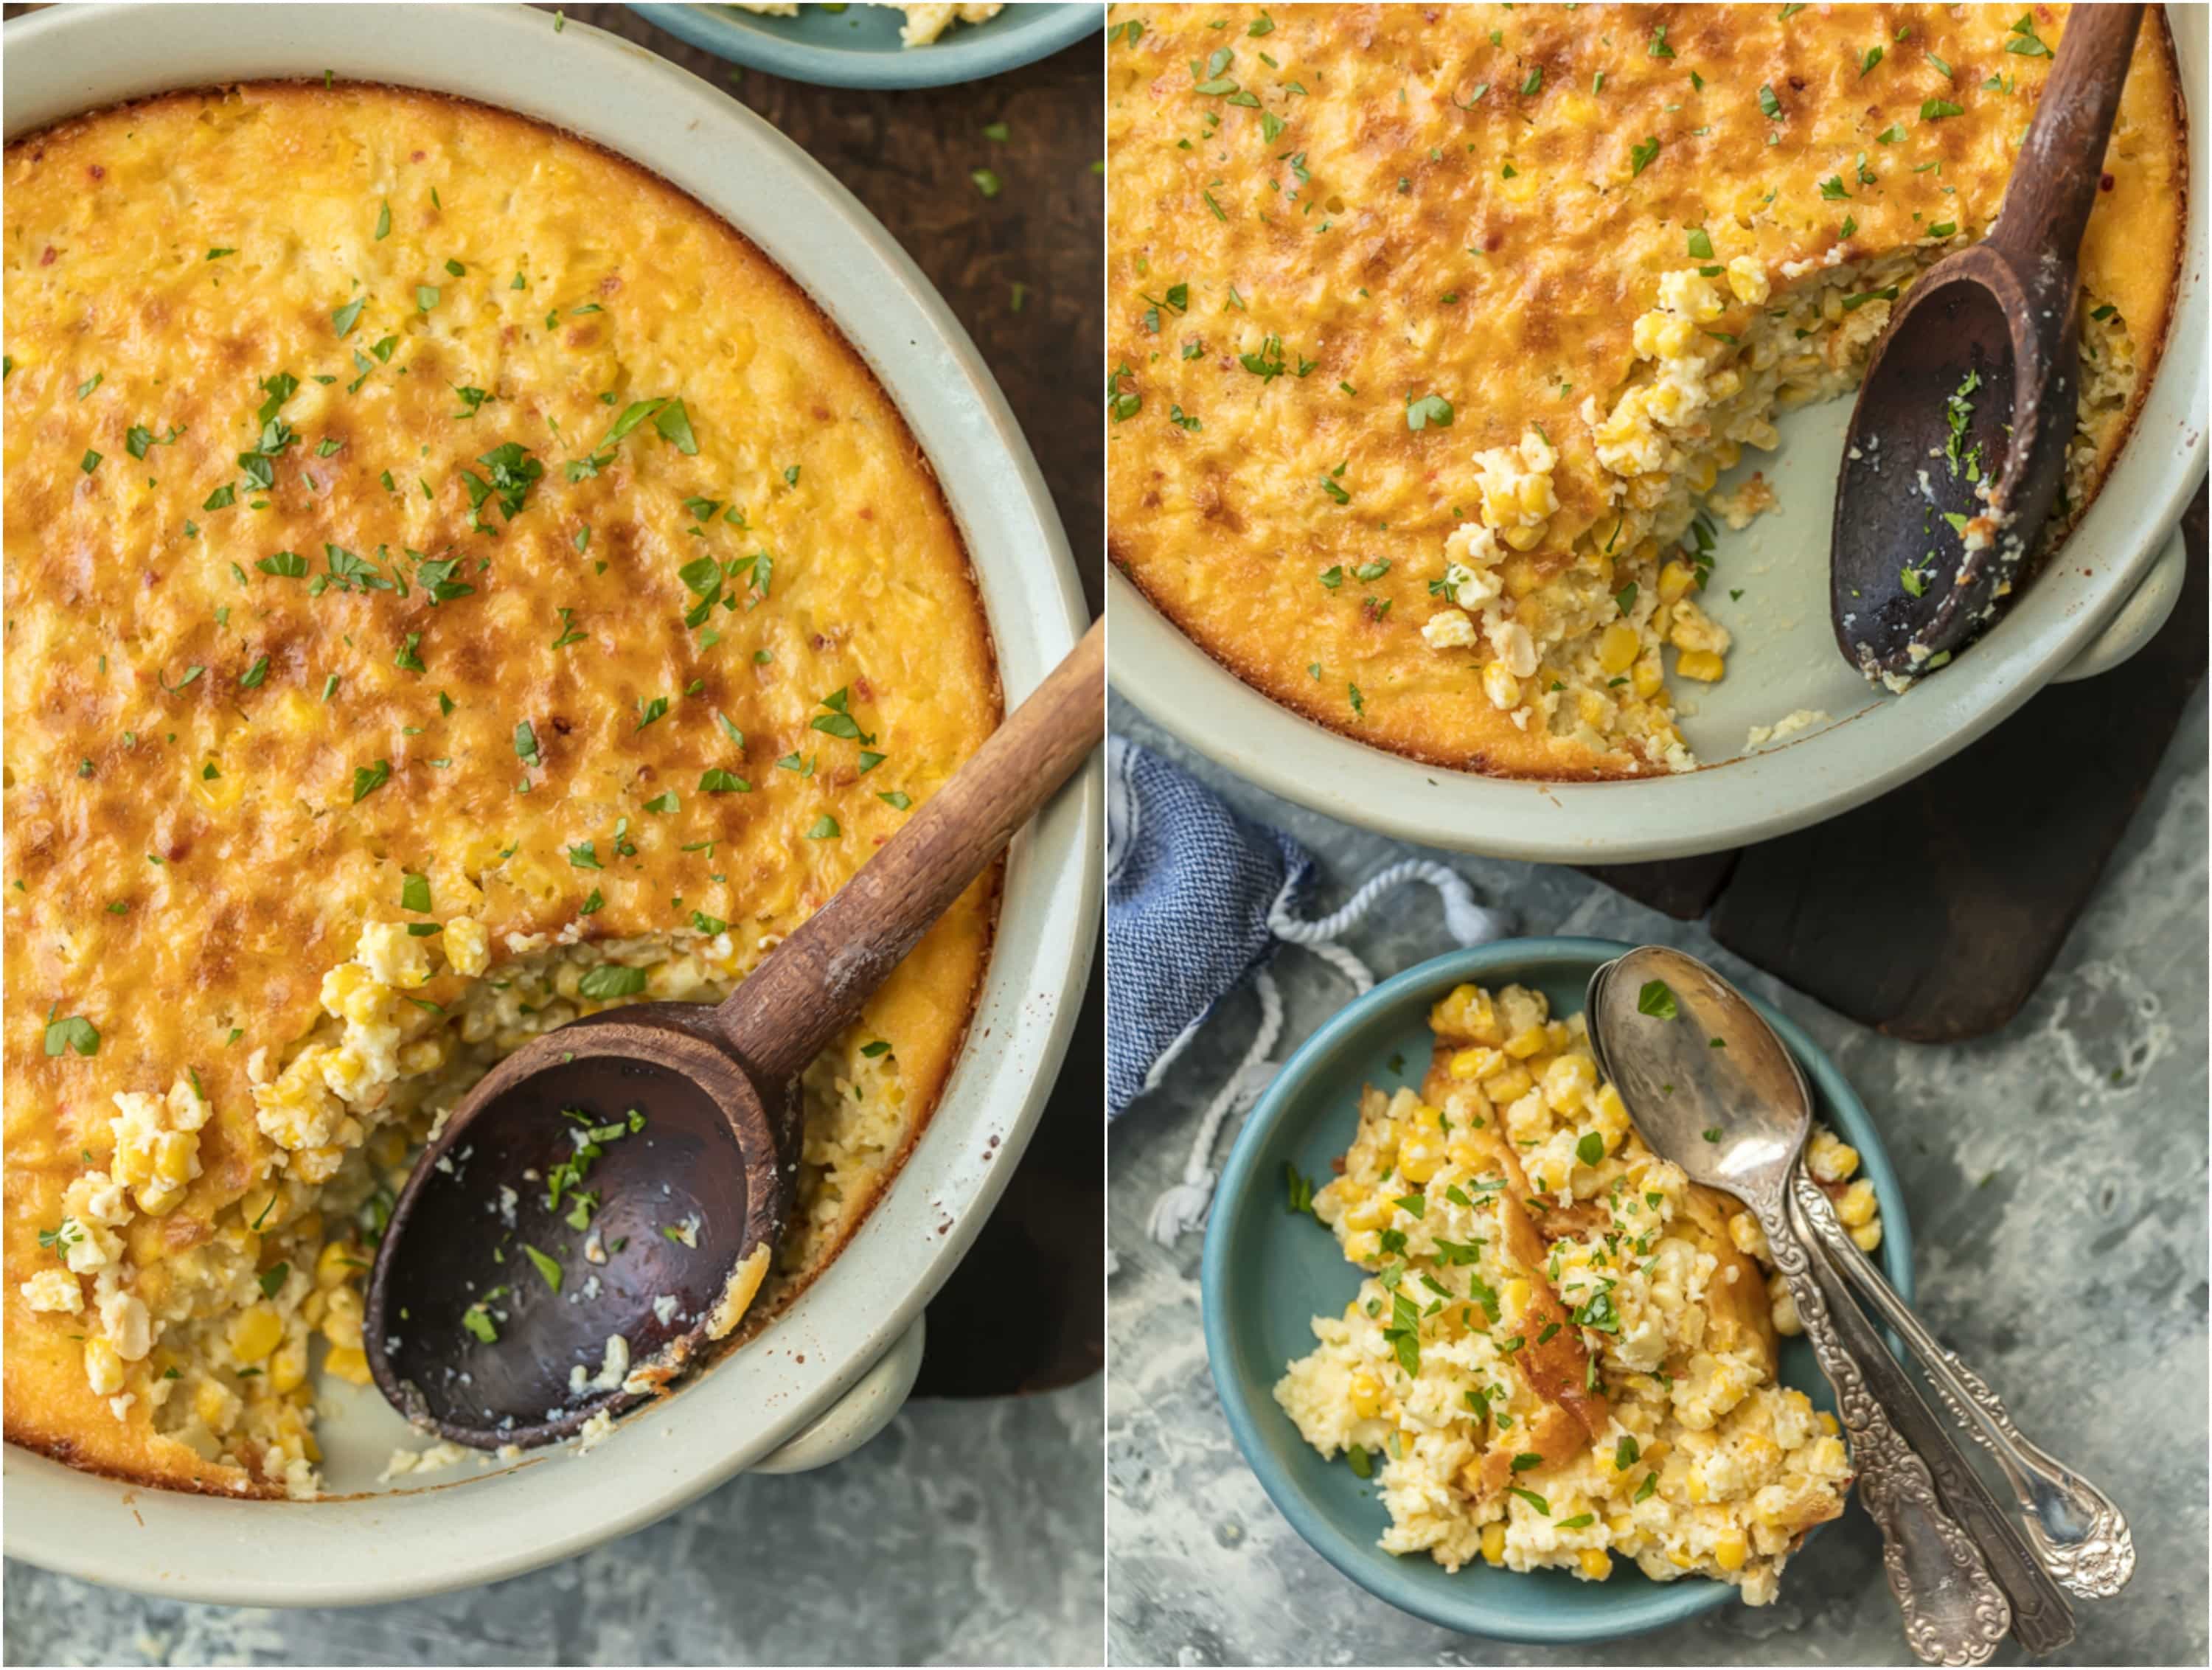 Your holiday table isn't complete without CLASSIC CORN PUDDING! This delicious side dish is the perfect complement for Thanksgiving foods such as turkey and greens or Christmas favorites, especially ham. YUM!